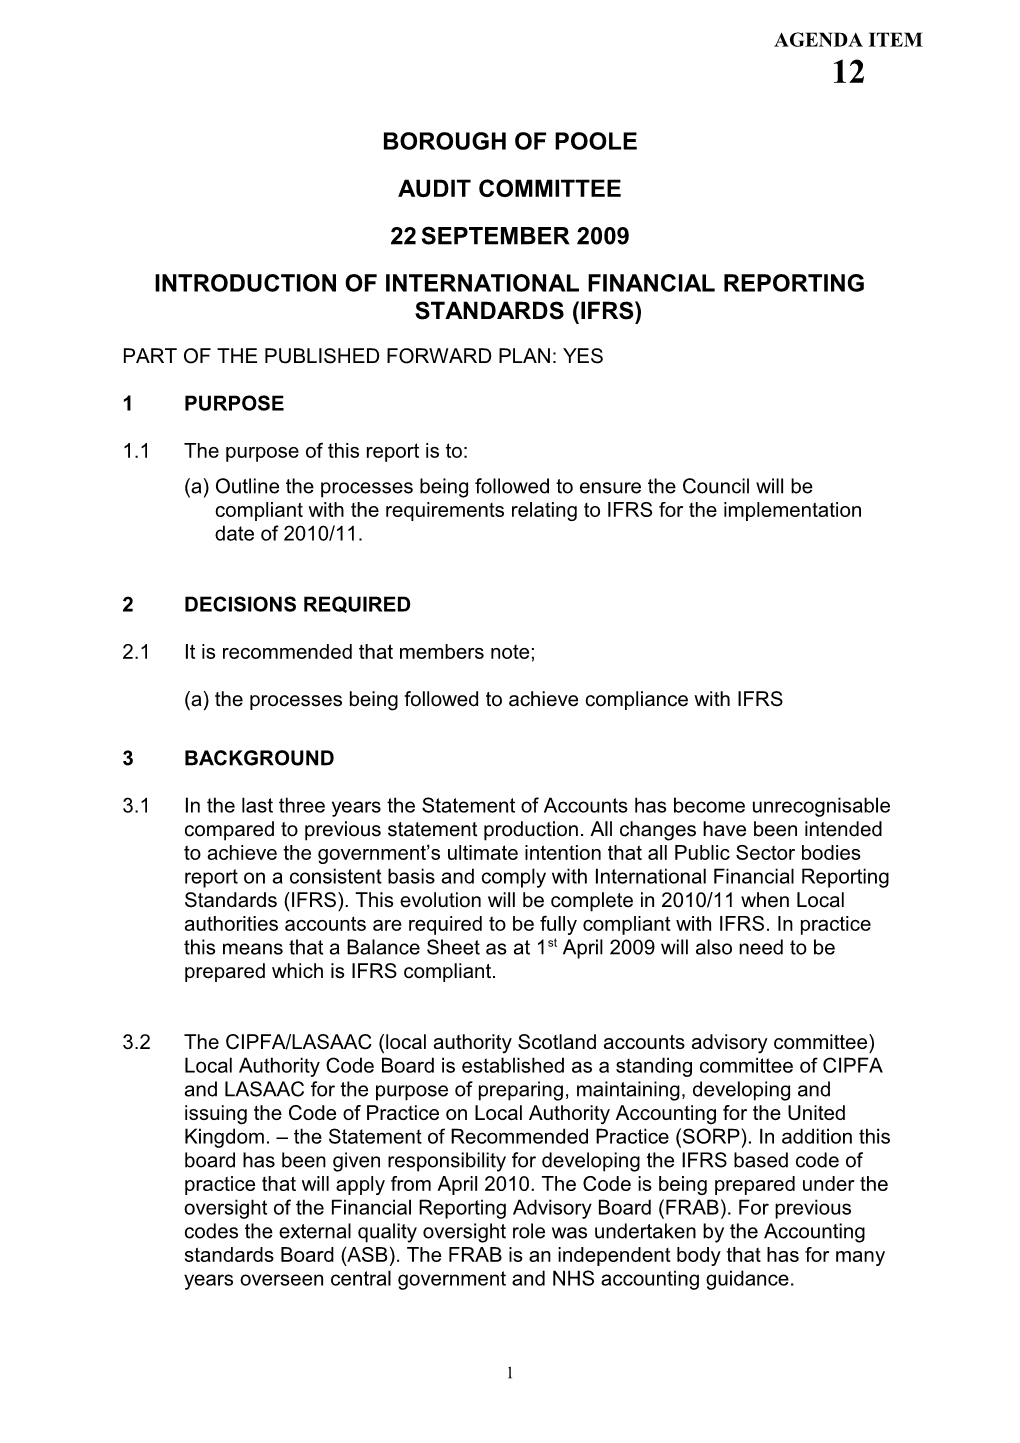 Introduction of International Financial Reporting Standards (Ifrs)